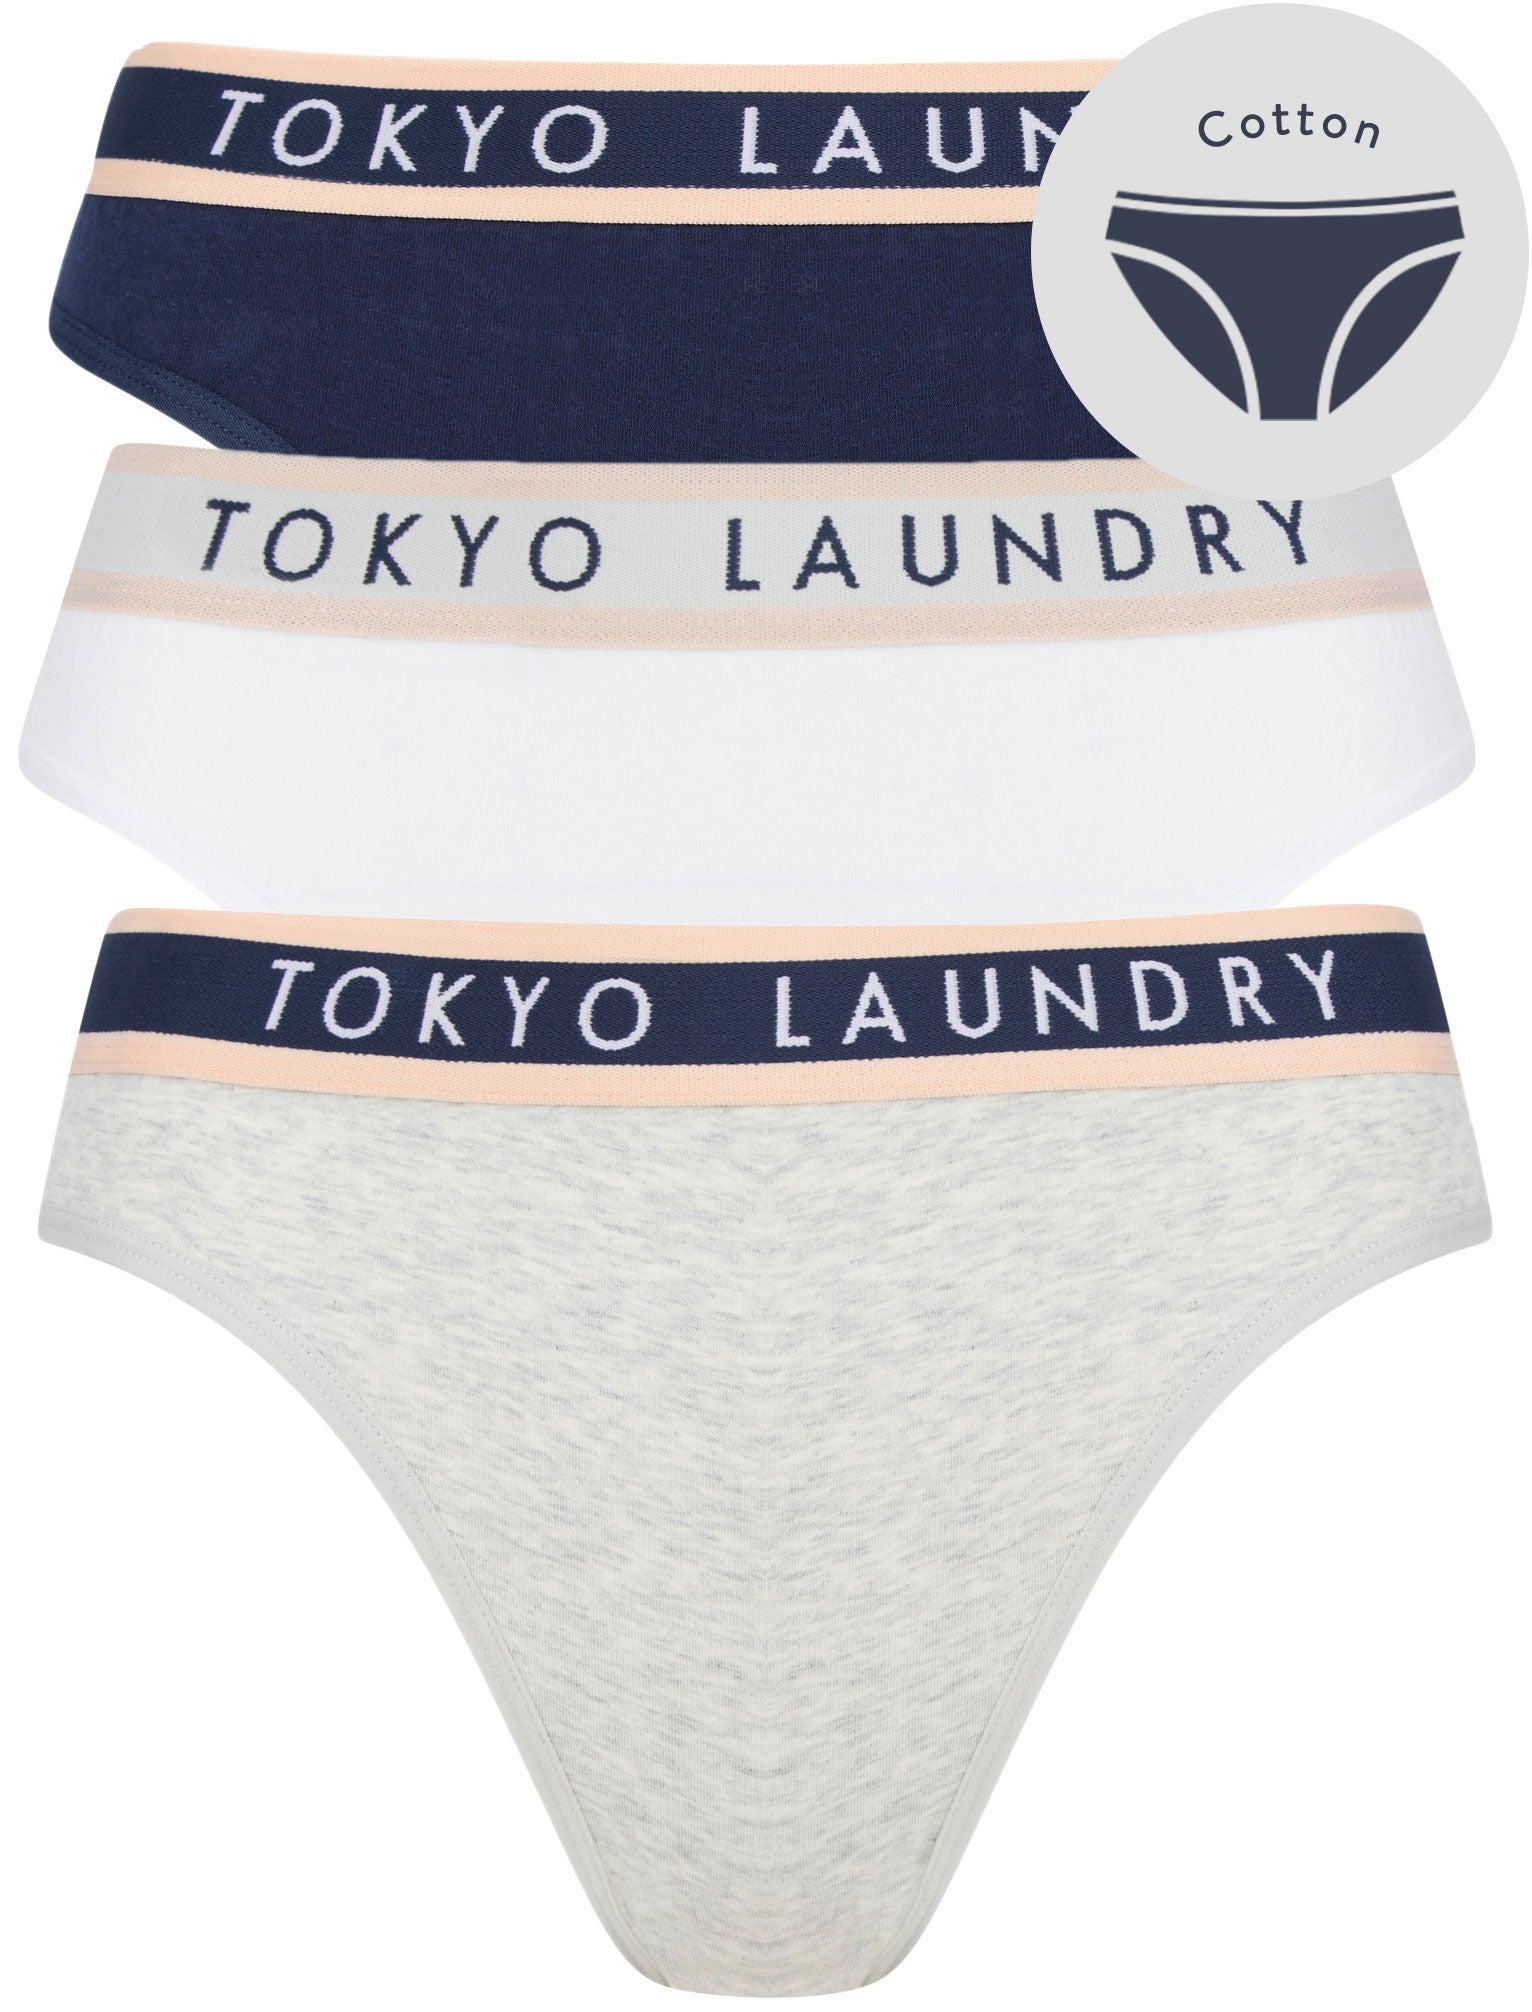 Womens Underwear Dolly (3 Pack) Cotton Assorted Briefs in Light Grey Marl / Bright White / Dress Blue - Tokyo Laundry / L - Tokyo Laundry